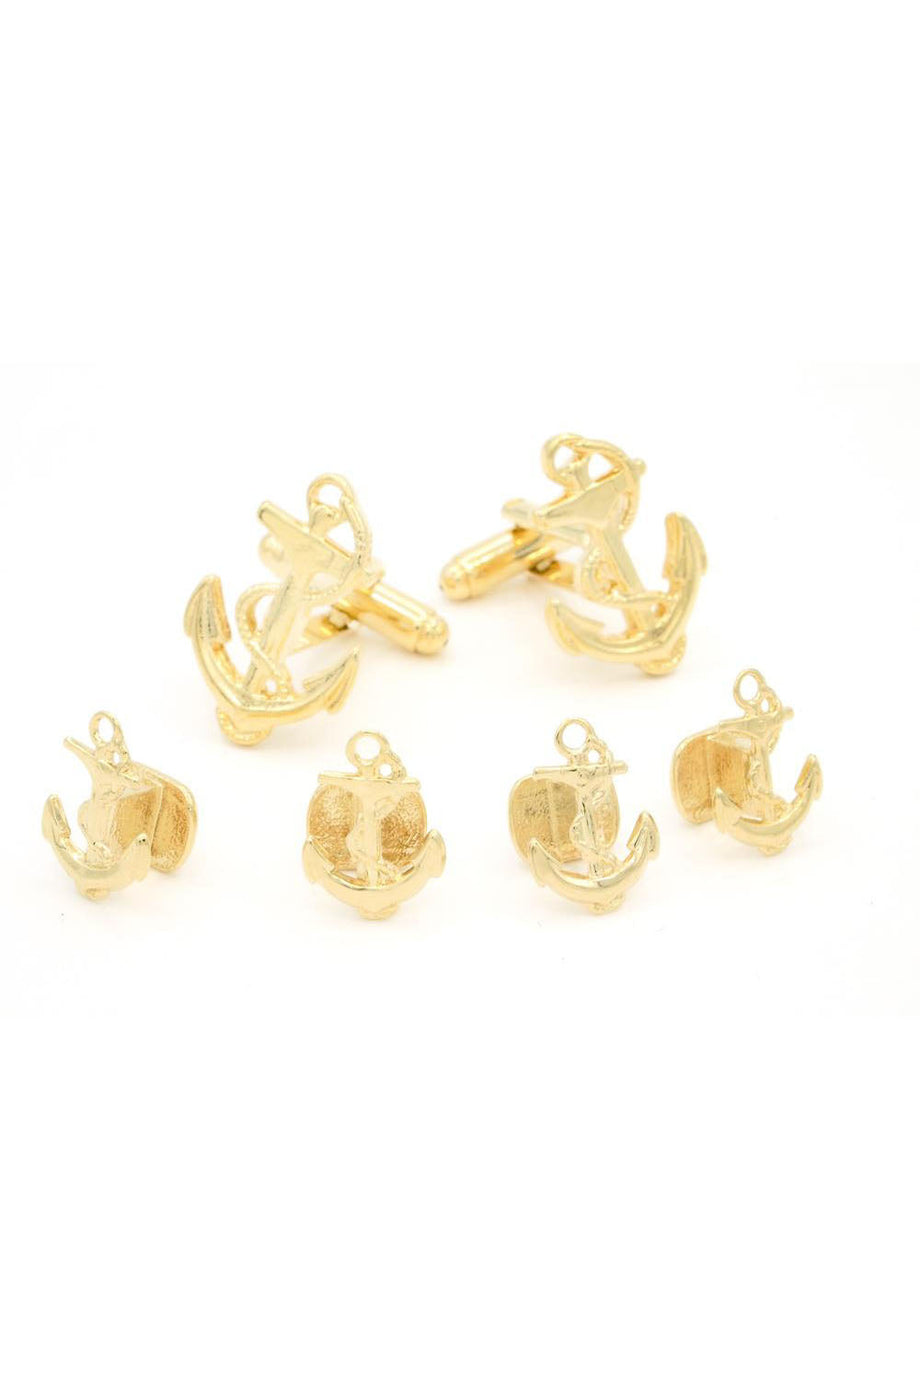 JJ Weston Anchor and Rope Gold Studs and Cufflinks Set